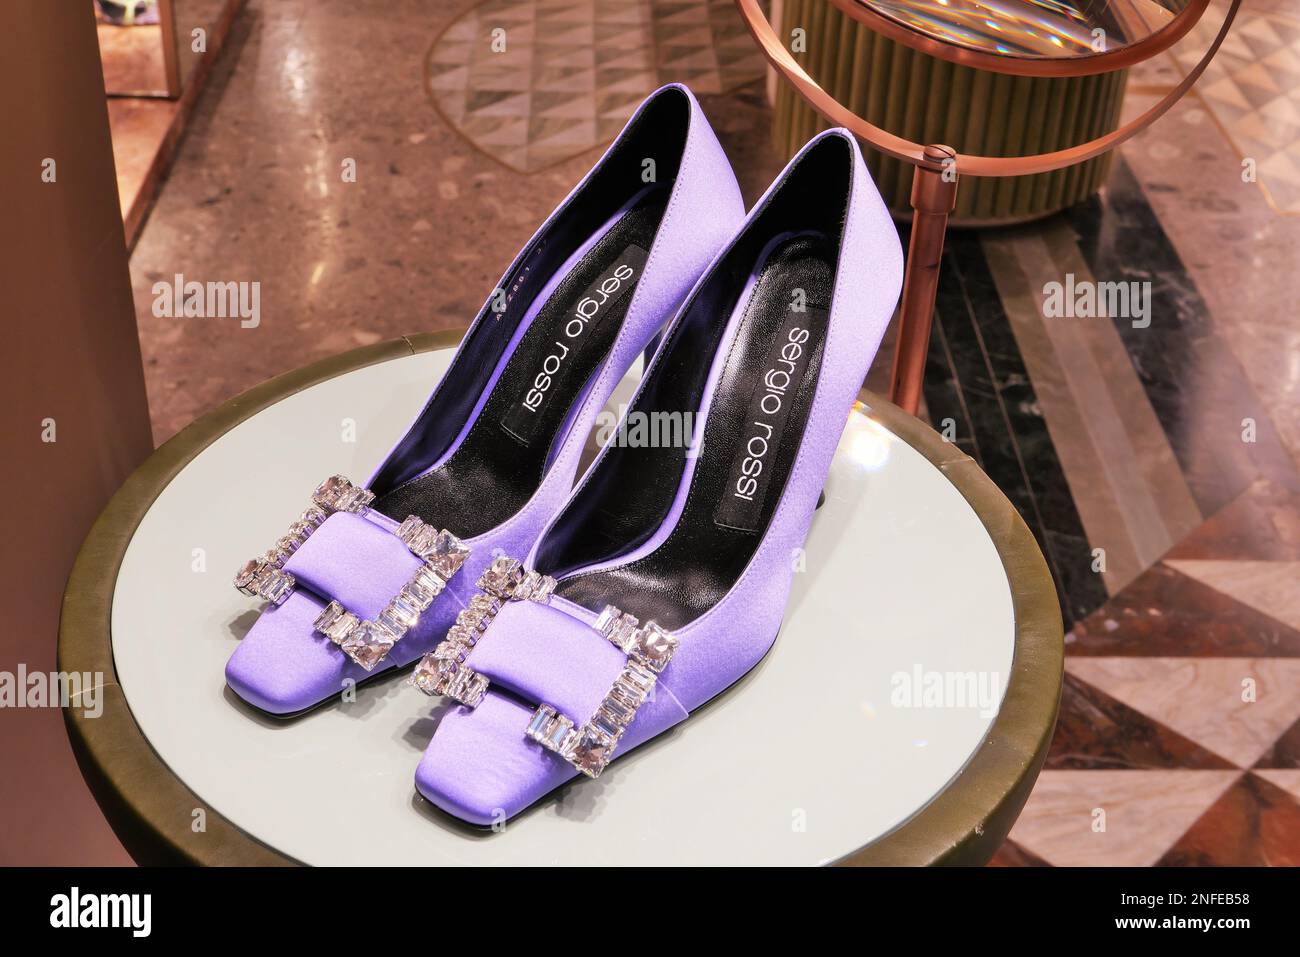 WOMEN'S SHOES ON DISPLAY AT SERGIO ROSSI FASHION BOUTIQUE Stock Photo -  Alamy